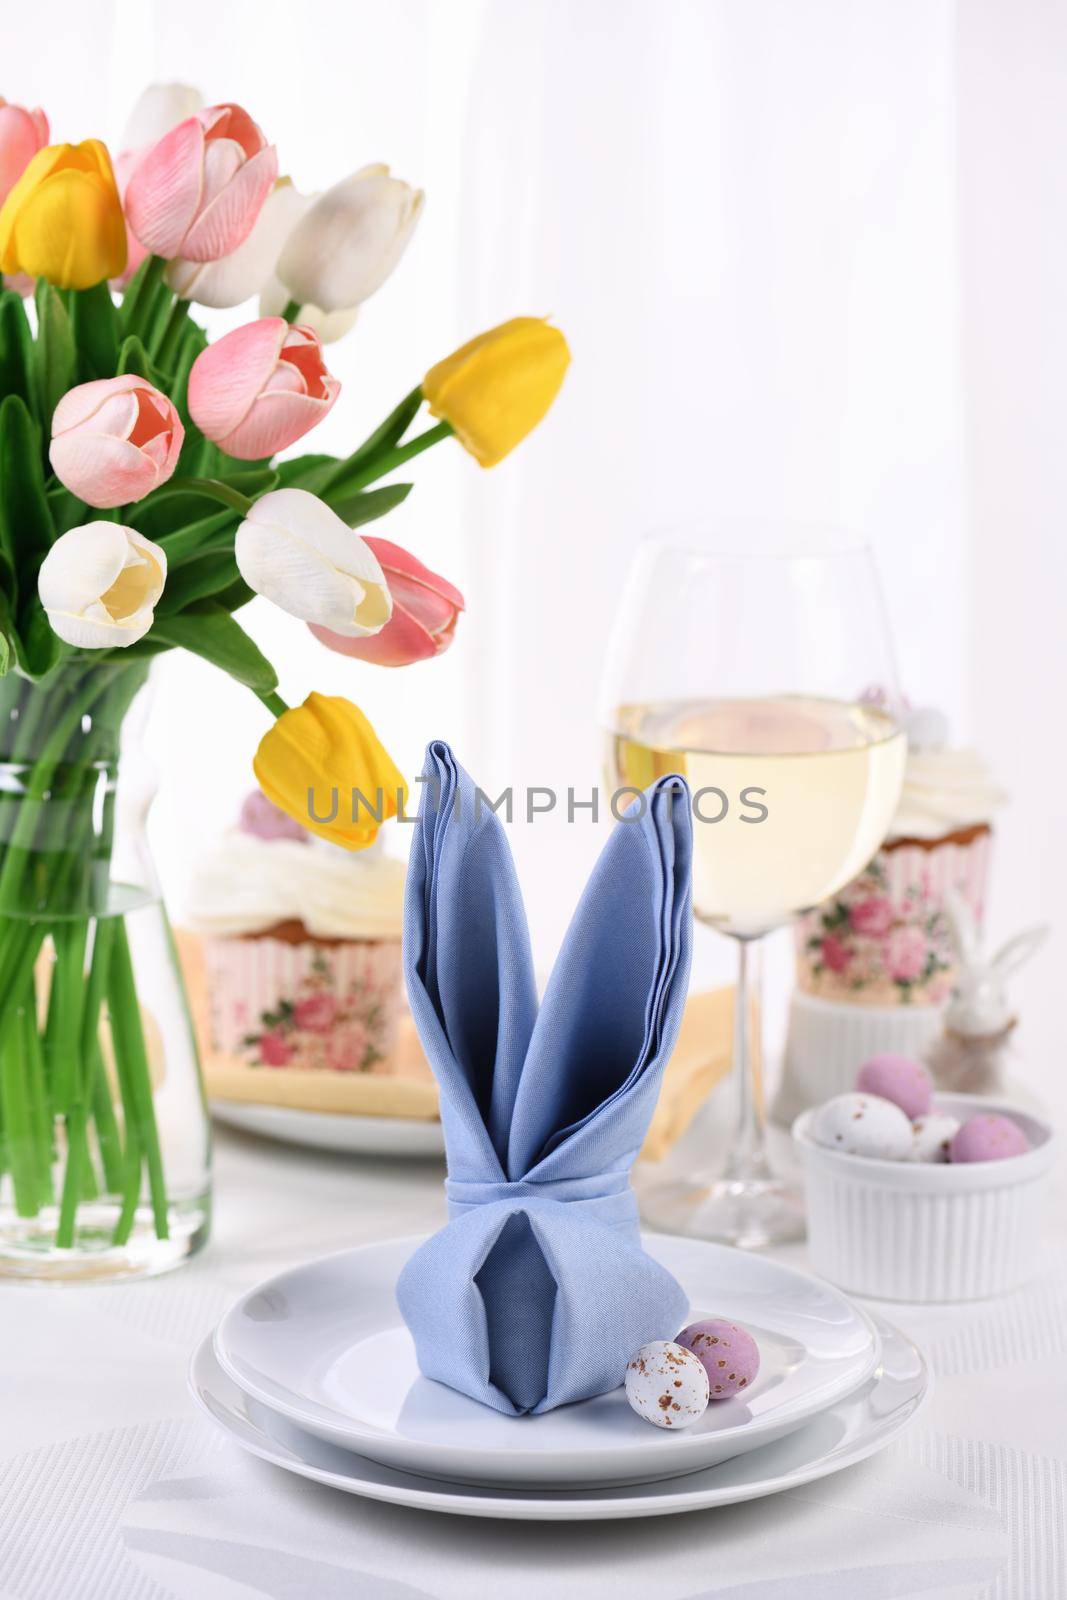 Festive table setting for Easter. by Apolonia